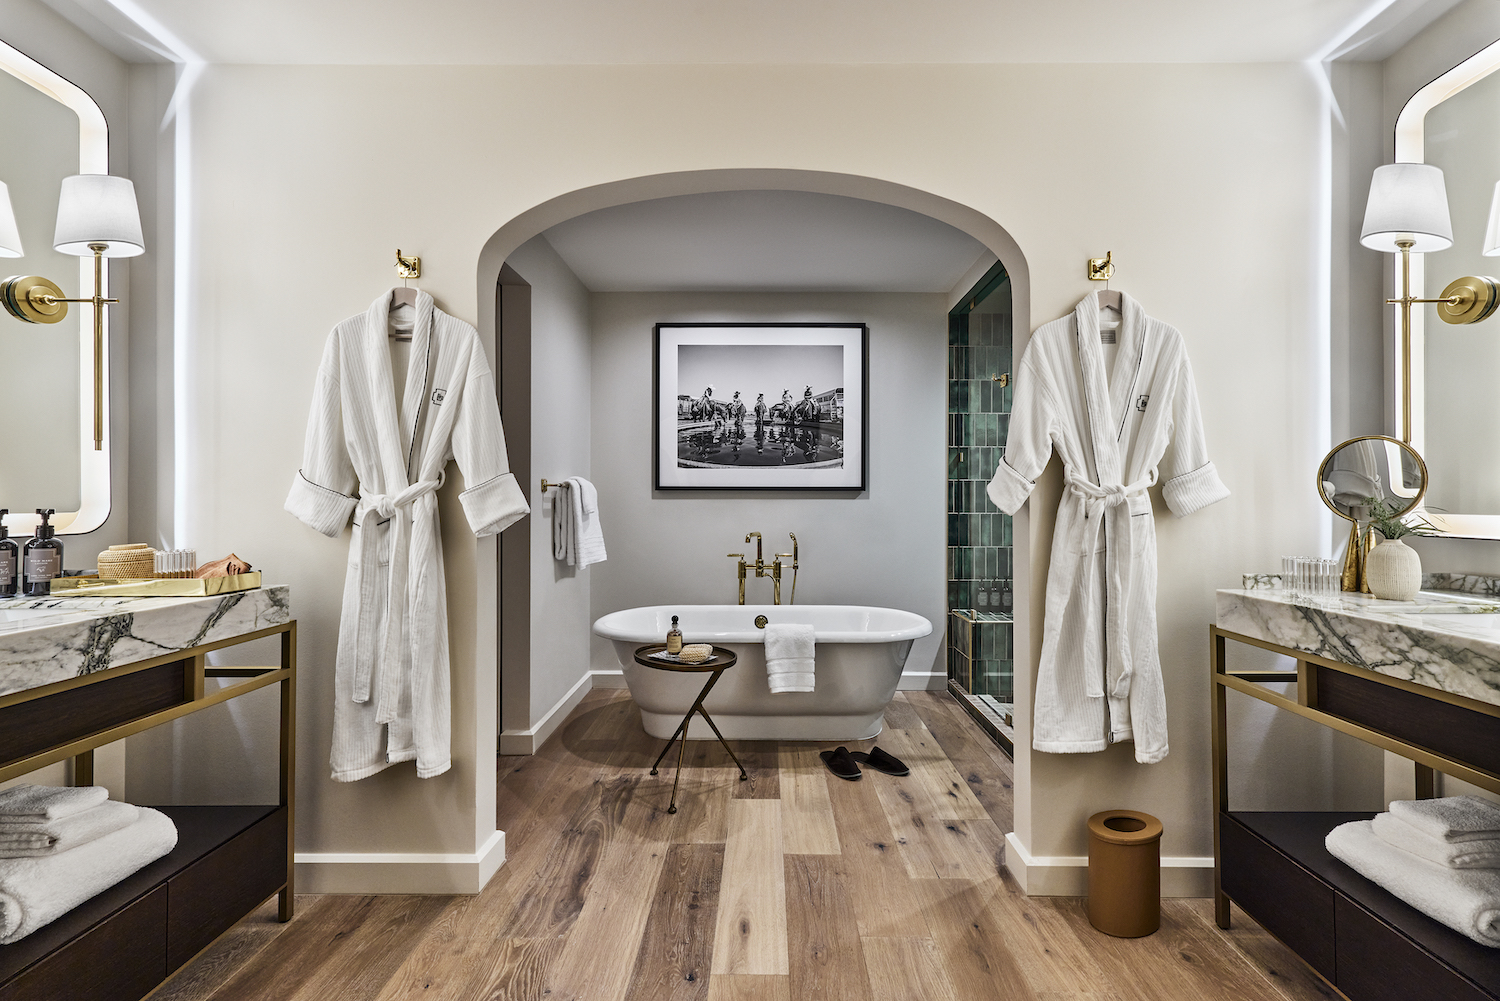 Luxury bathroom with wide bathtub, white robes and other accompanying bathroom wellness supplies